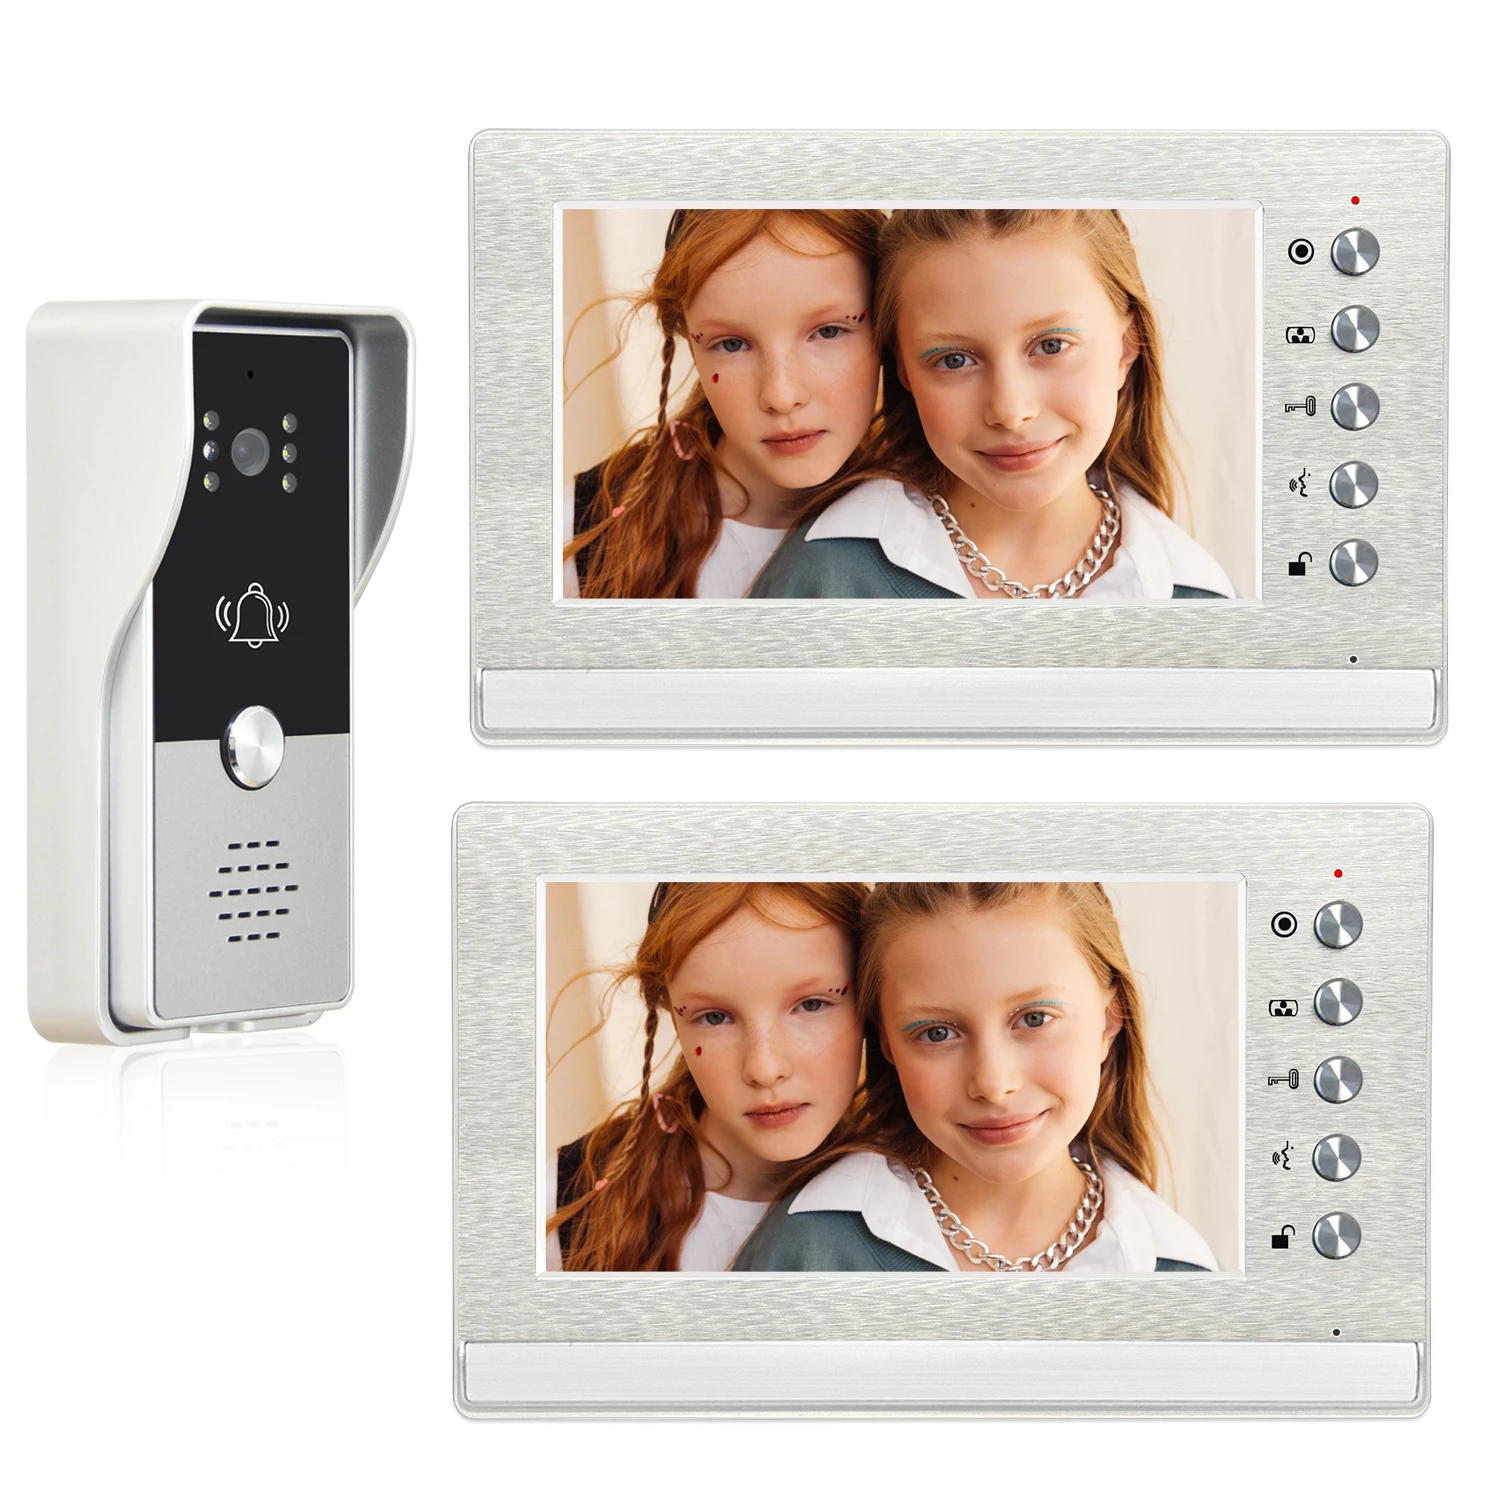 Wired Video Intercom system Video Door Phone Doorbell kits for Home Apartment for Apartment Home Lock Access Control Systemeen